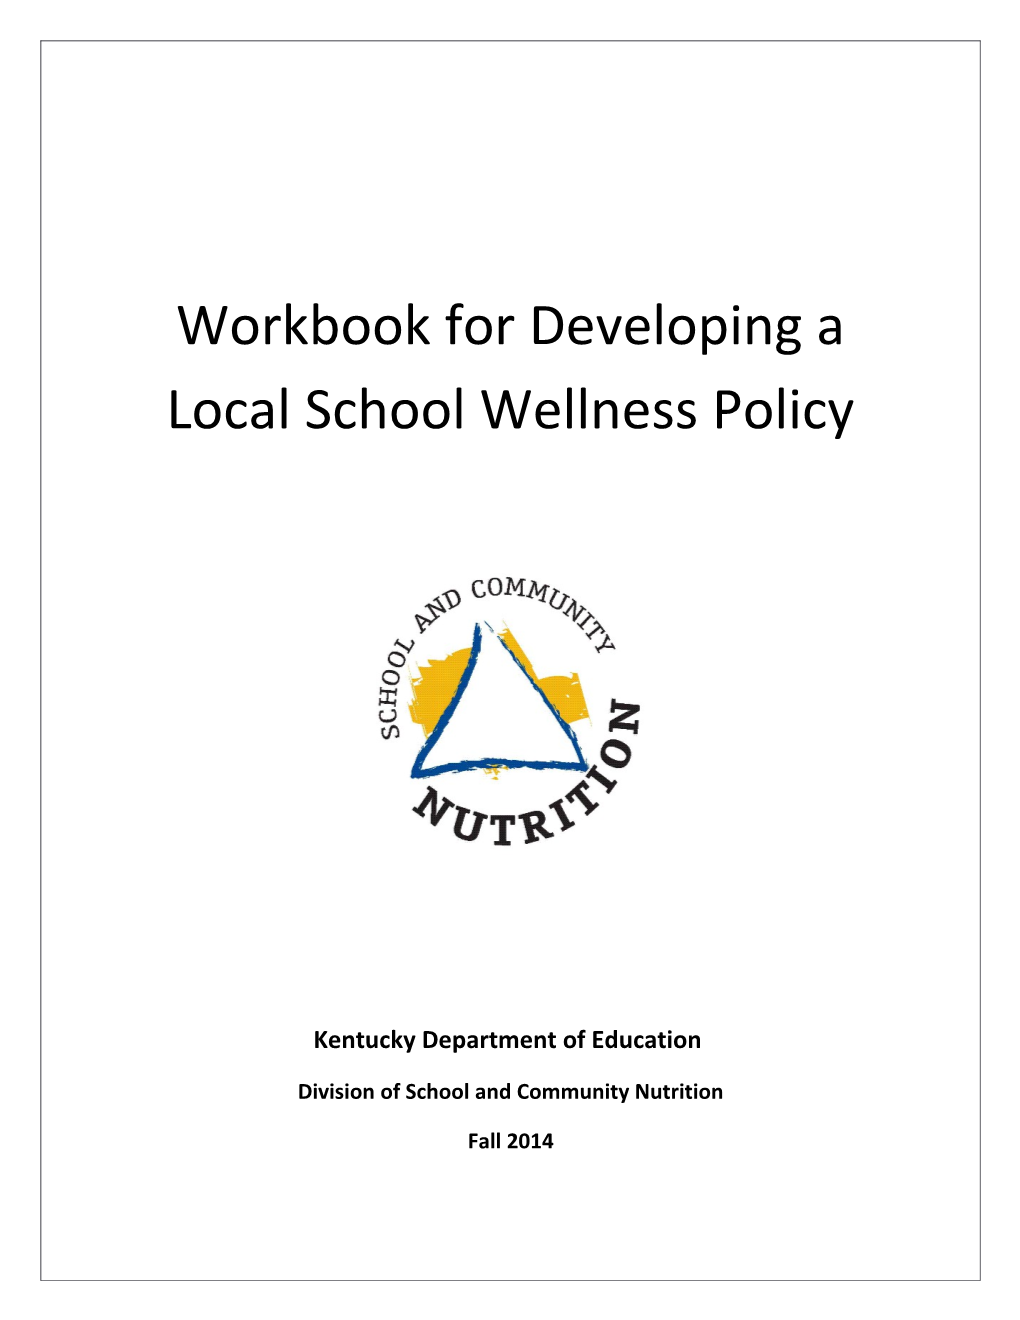 Workbook for Developing a Local School Wellness Policy